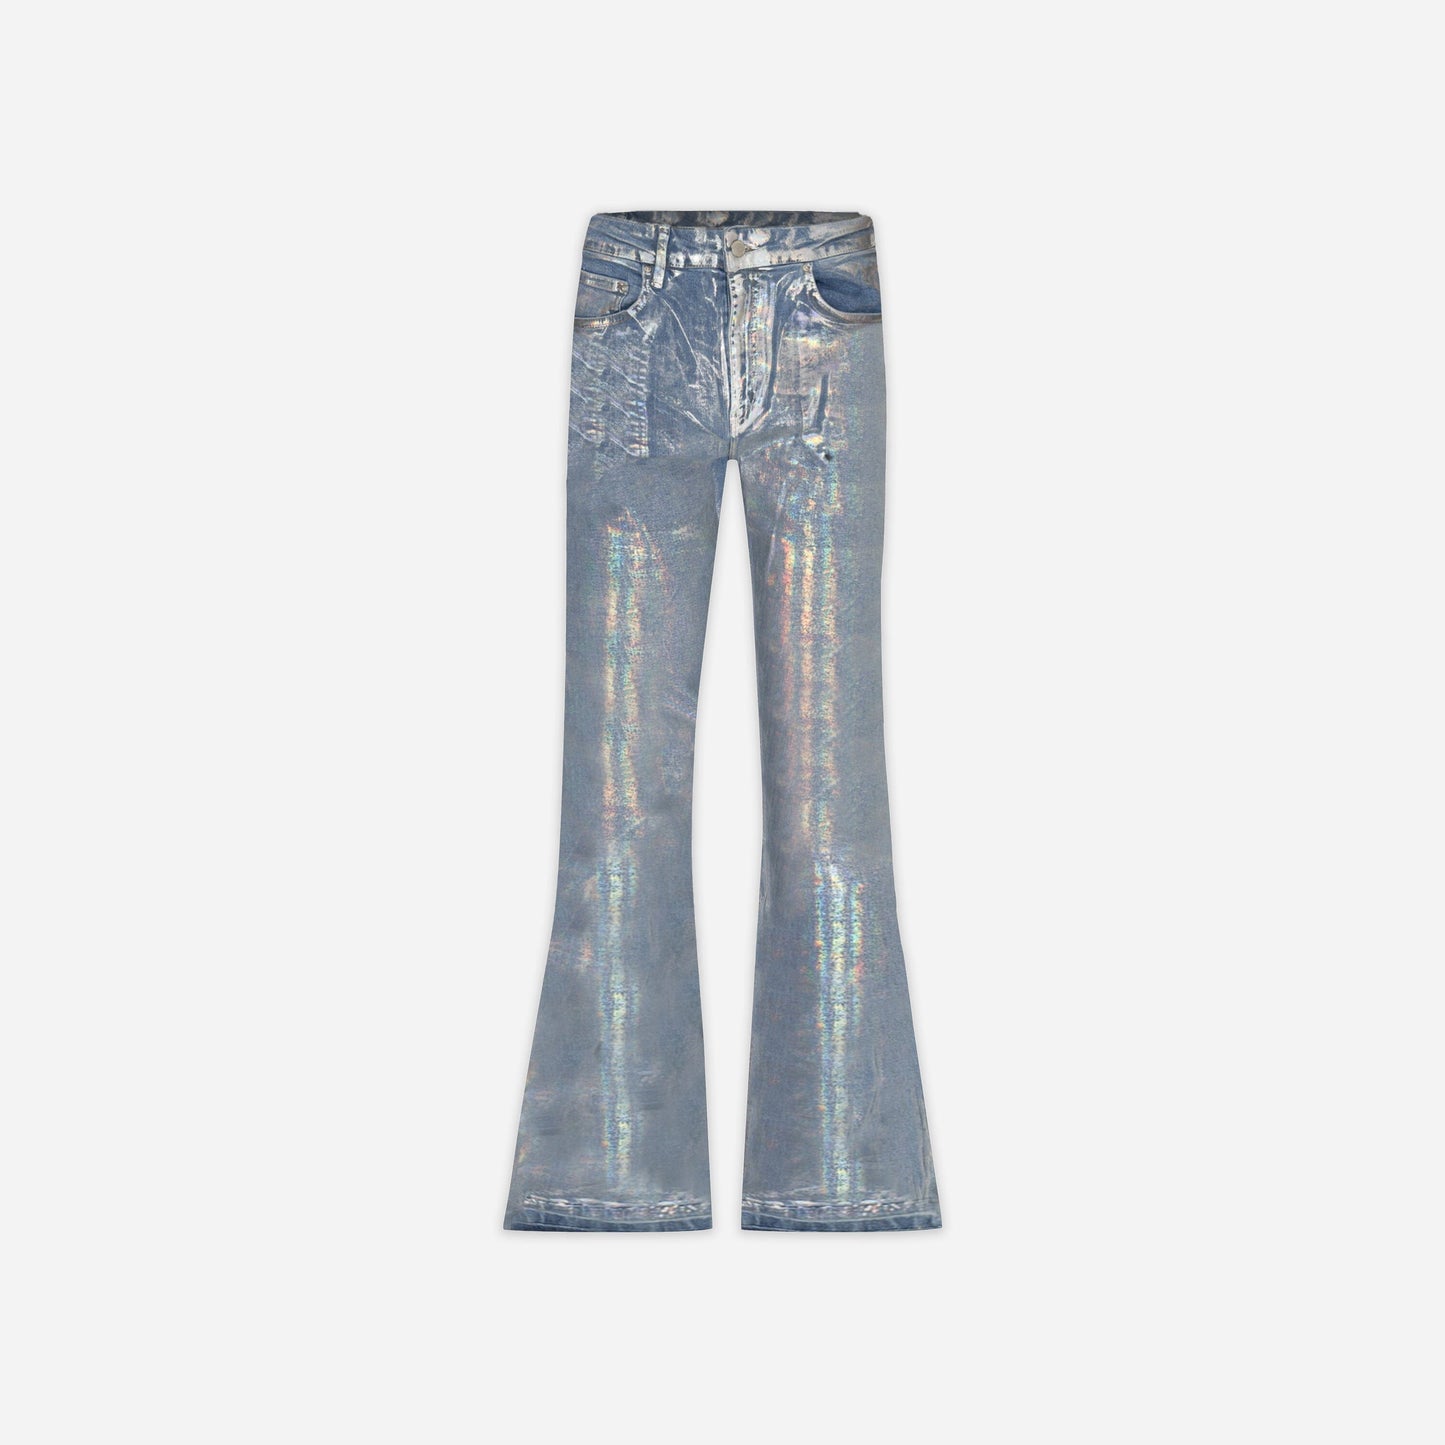 Flared Jeans in Shiny Silver Waxed Denim